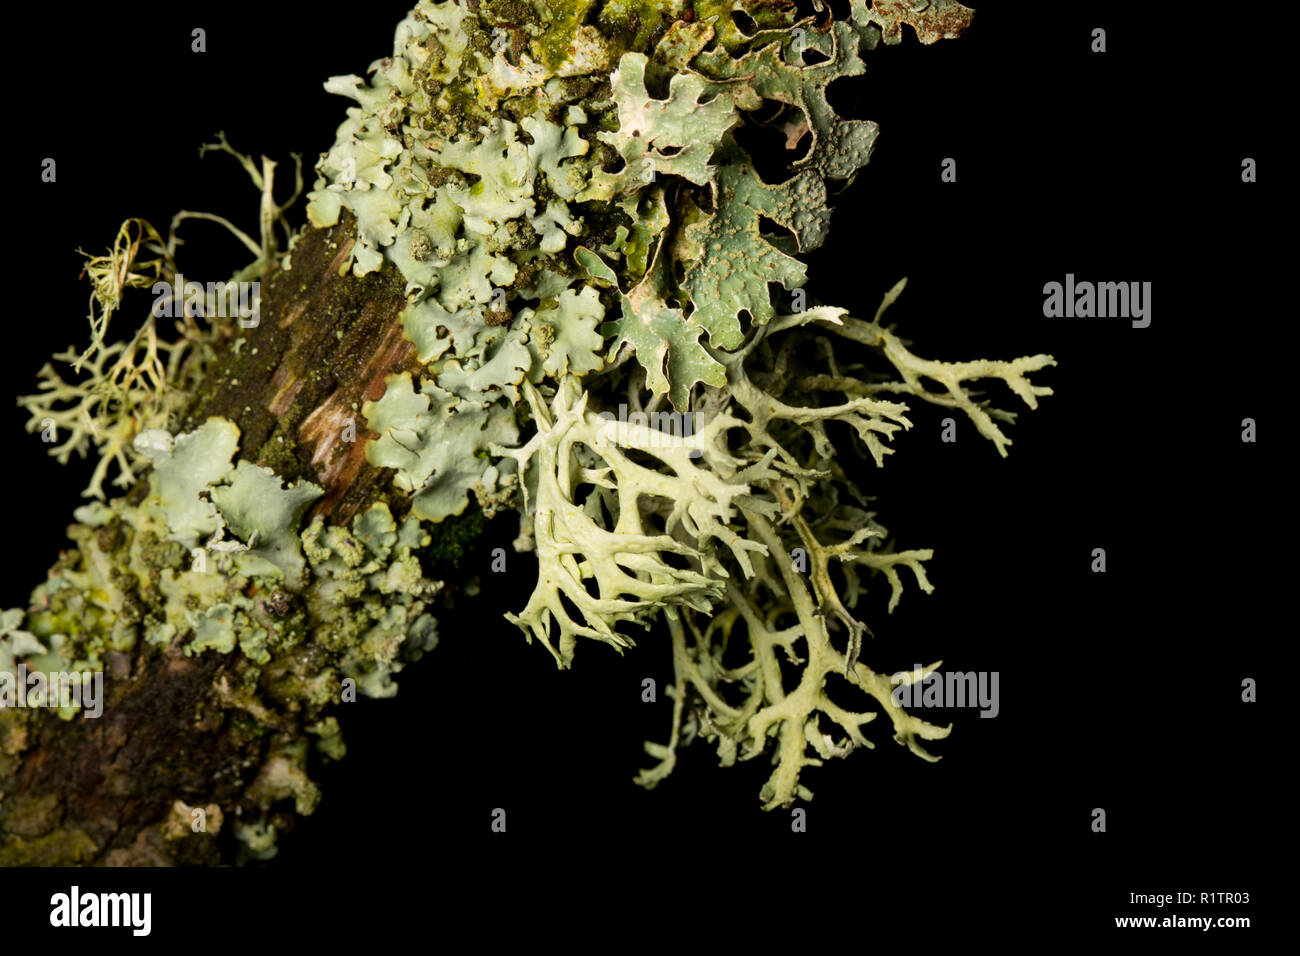 Oak moss lichen, Everania prunastri, growing on a tree branch in an area of rural woodland. Lichens are sensitive to air pollution. The lichen growing Stock Photo